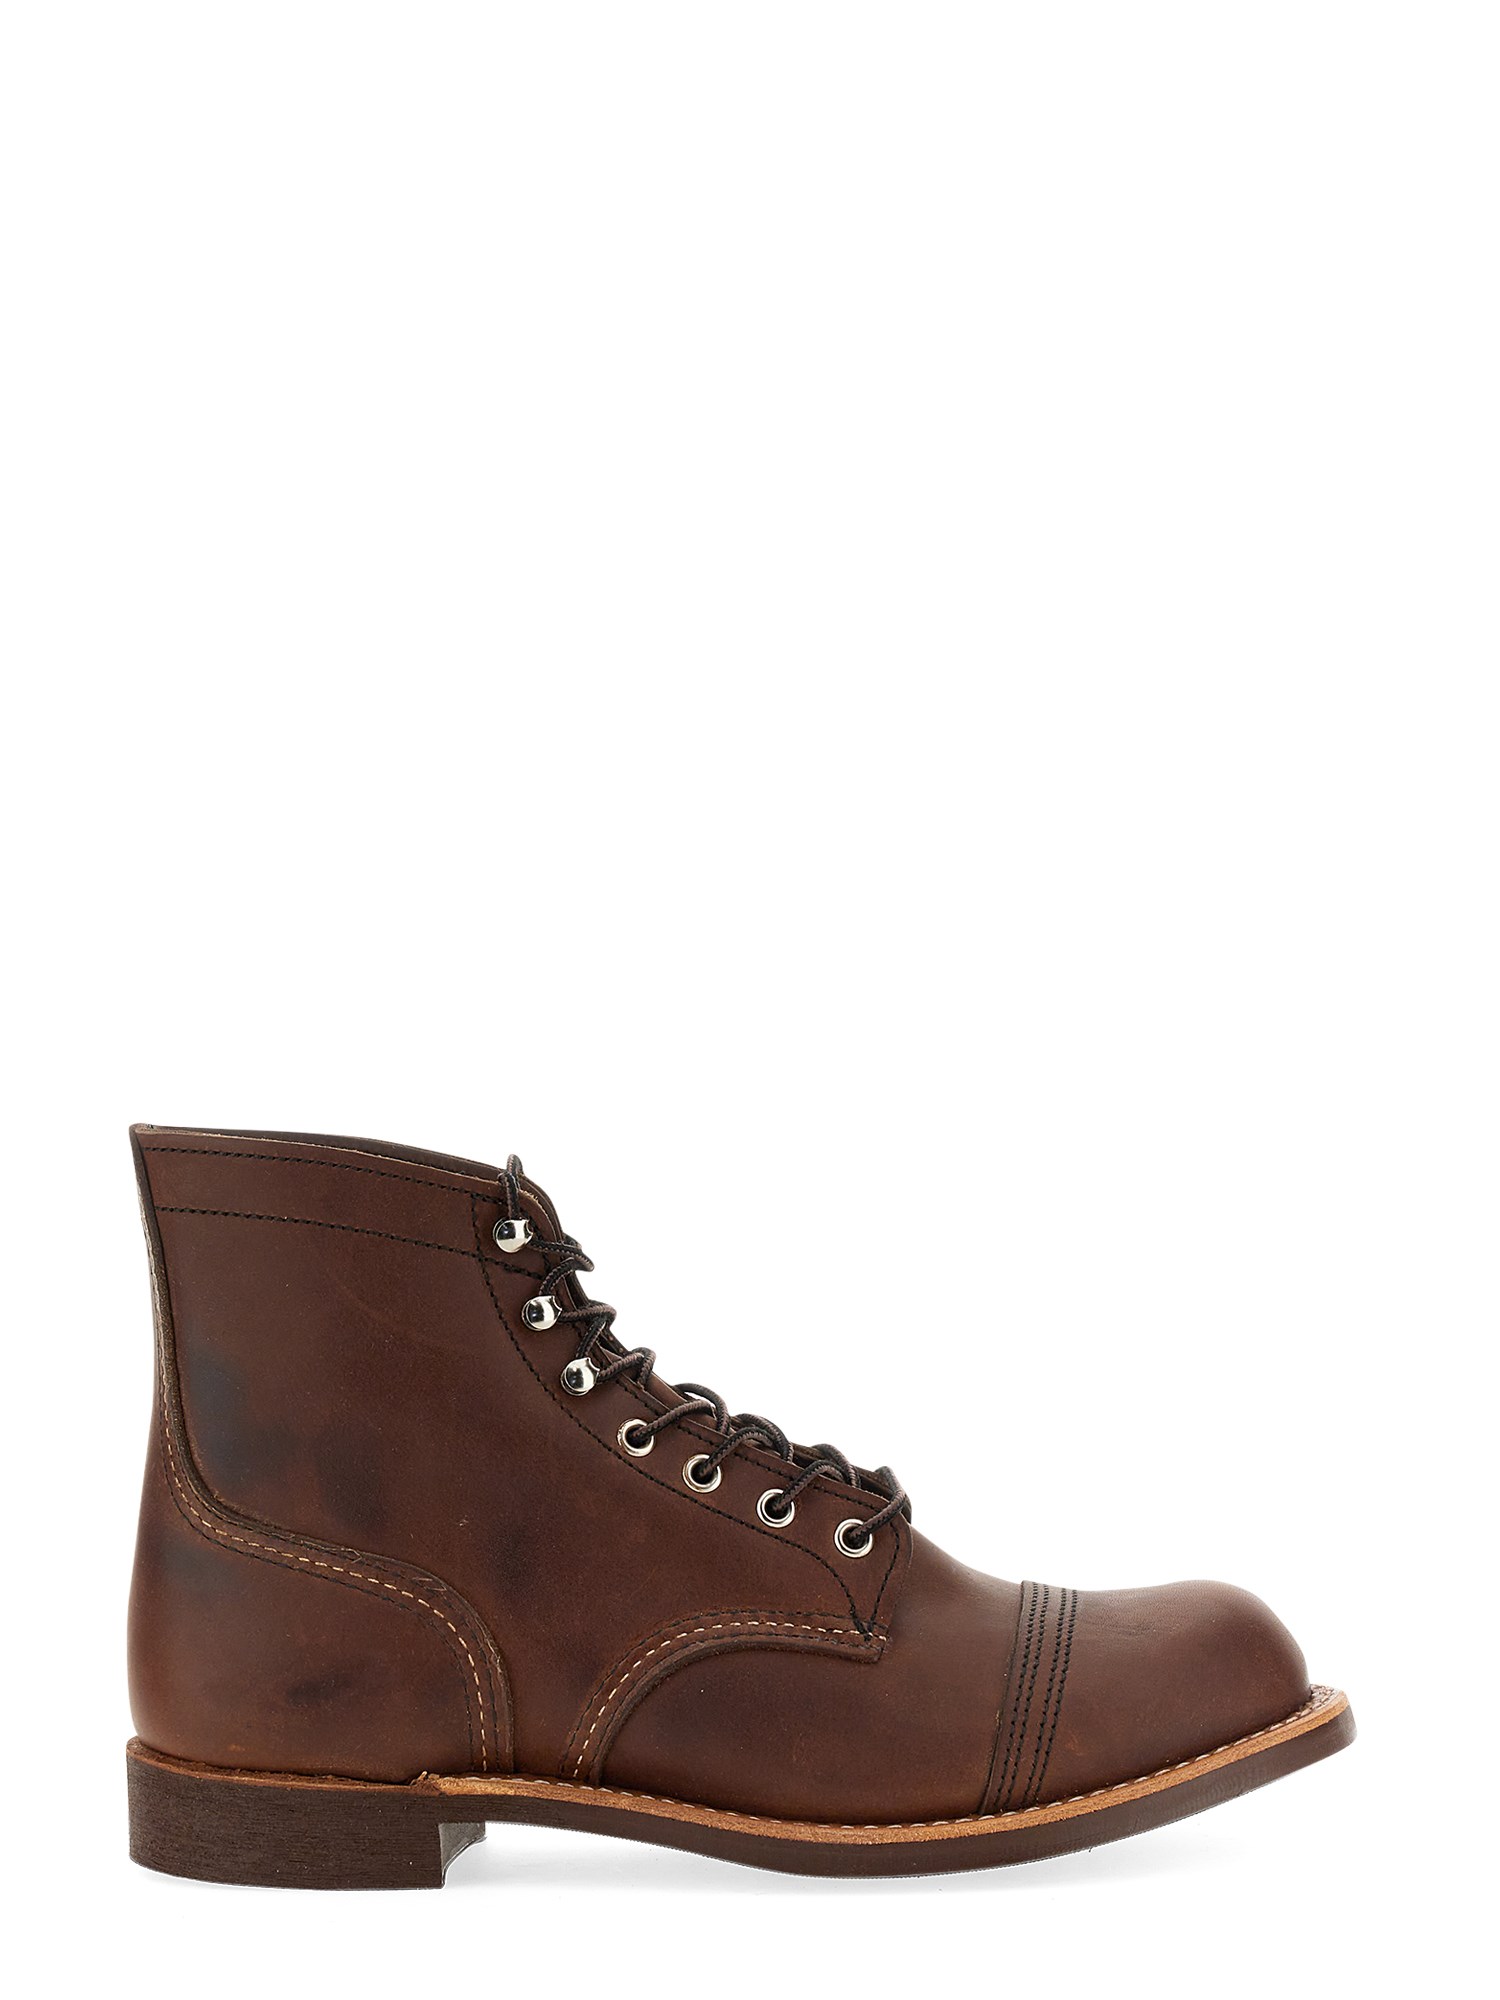 red wing red wing leather boot